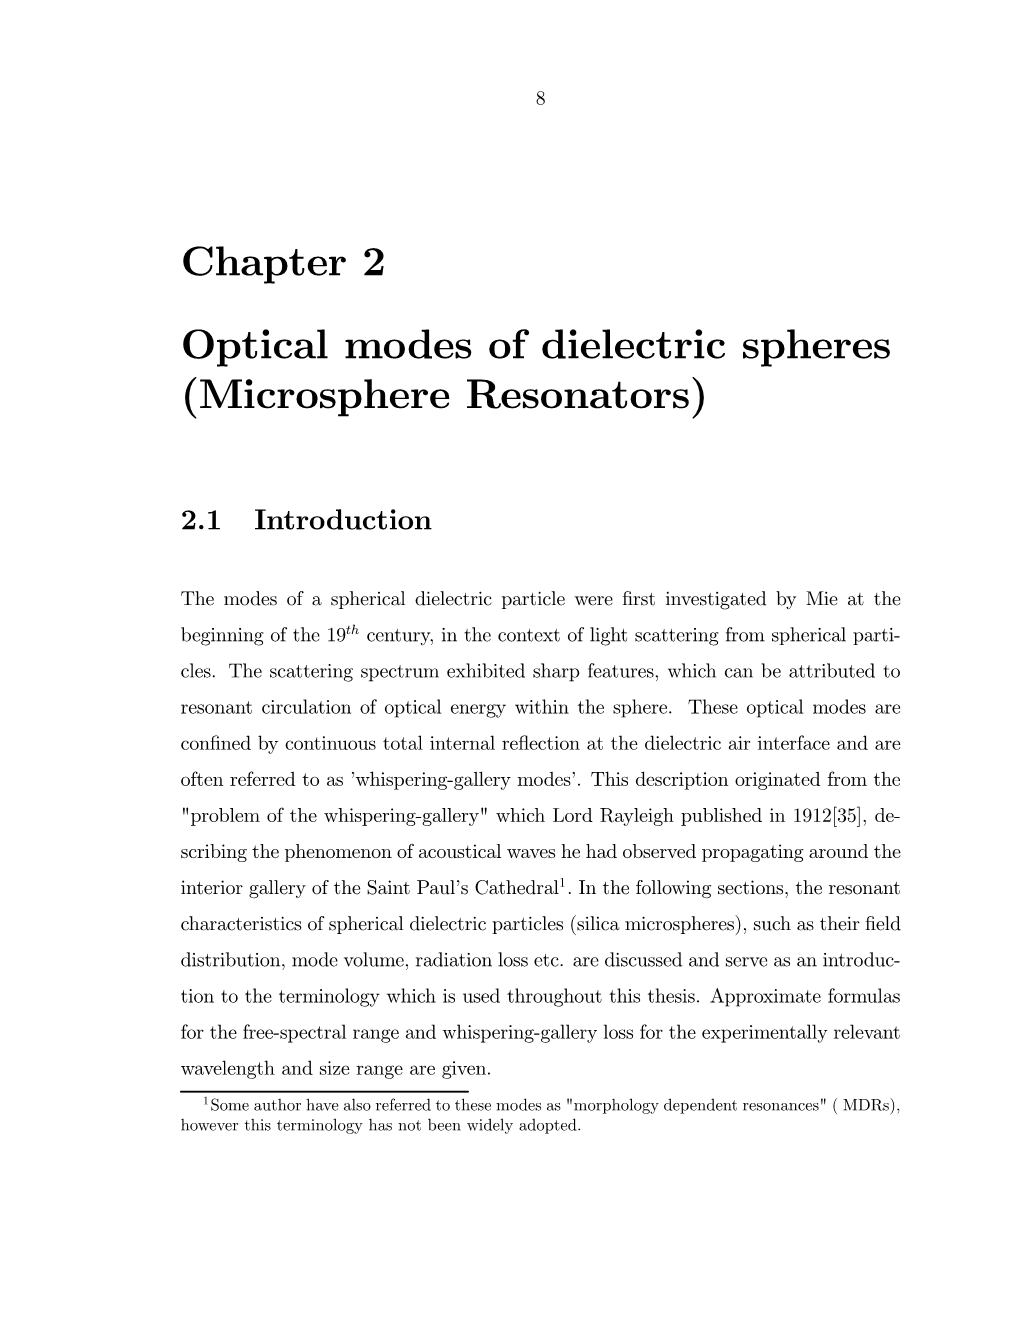 Chapter 2 Optical Modes of Dielectric Spheres (Microsphere Resonators)